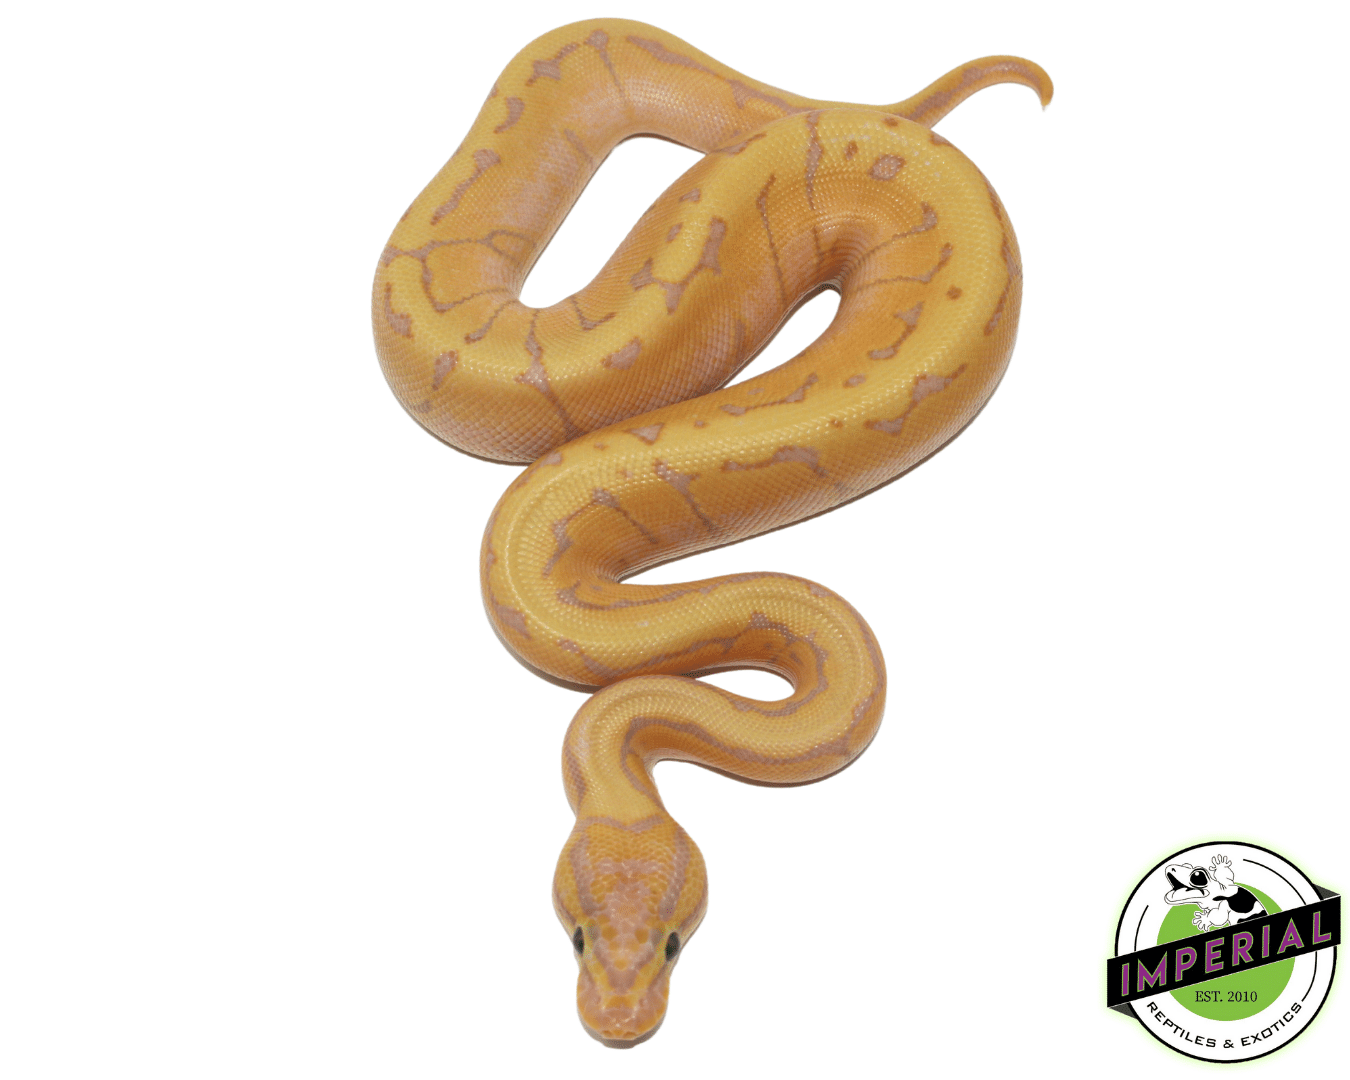 ball python for sale, buy ball pythons online at cheap prices